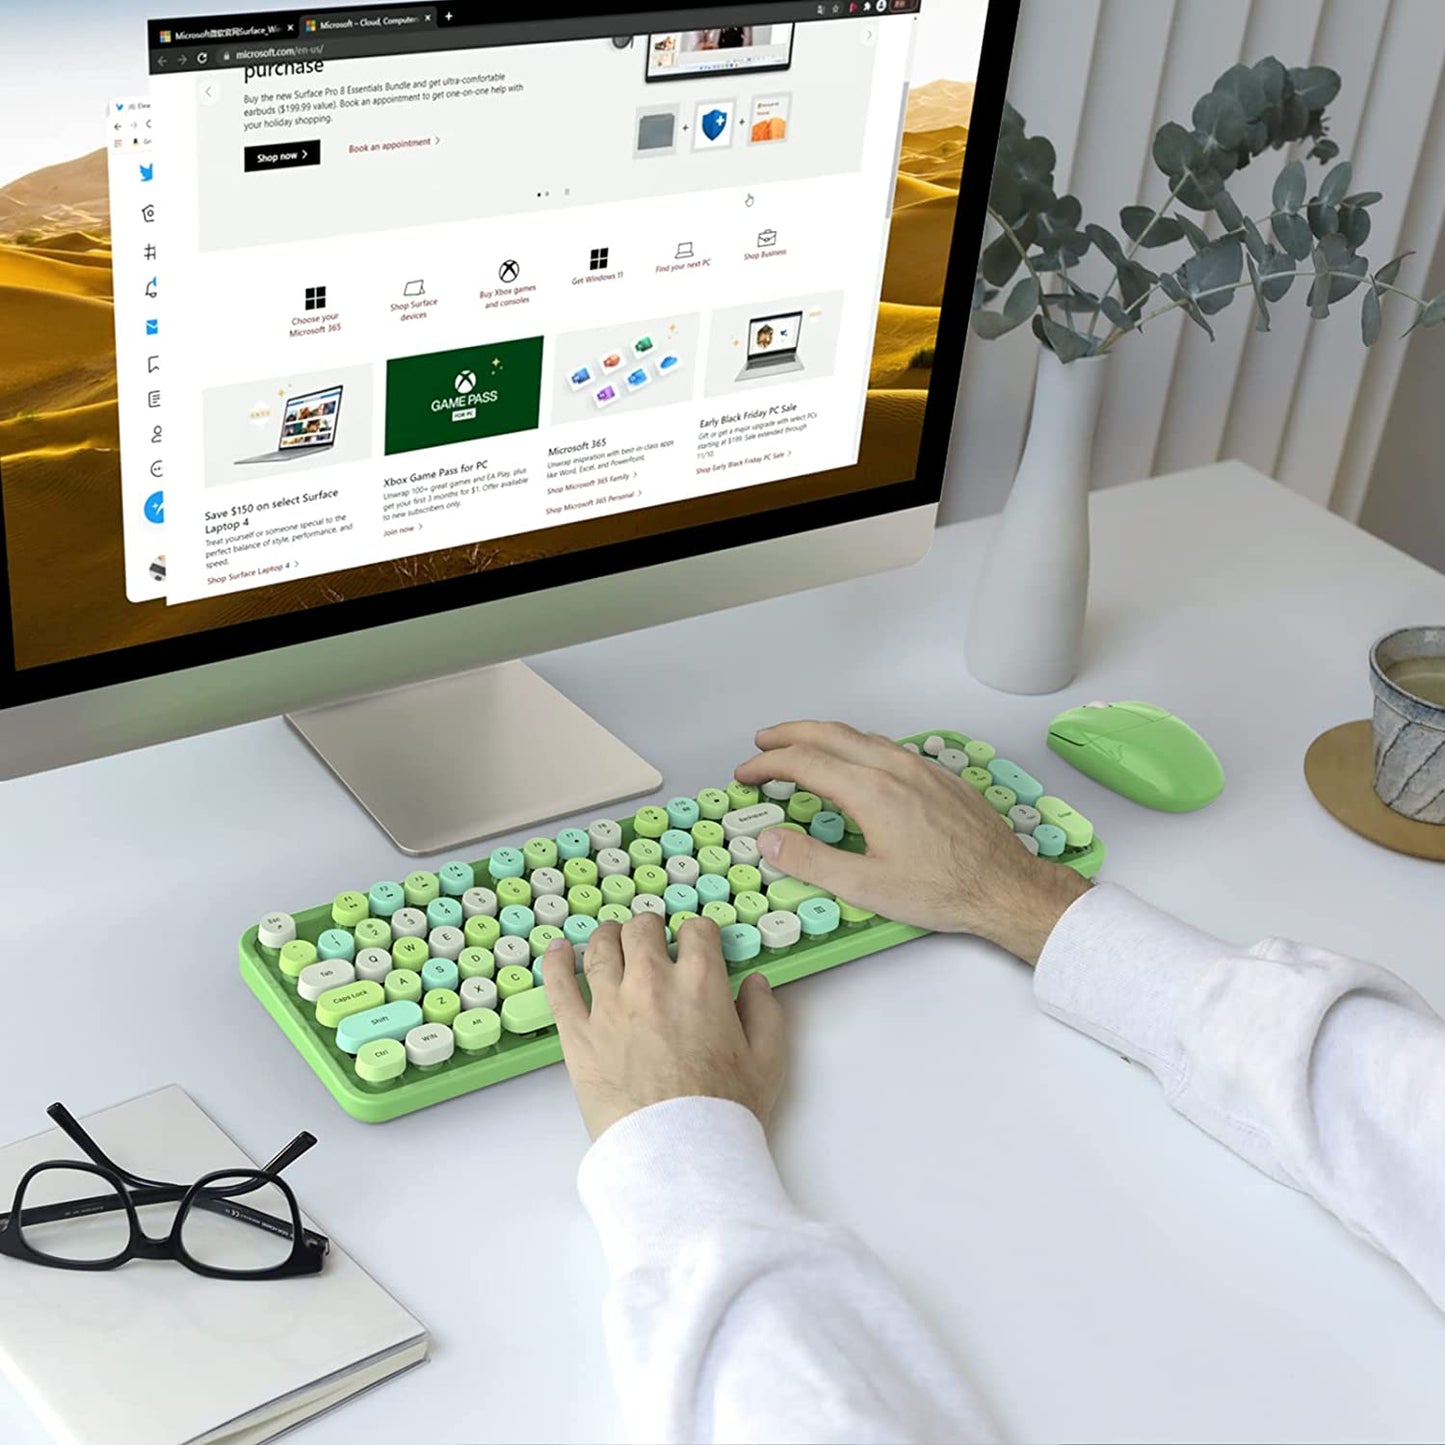 A pair of hands is typing on a green colored wireless keyboard and mouse in front of a computer screen.